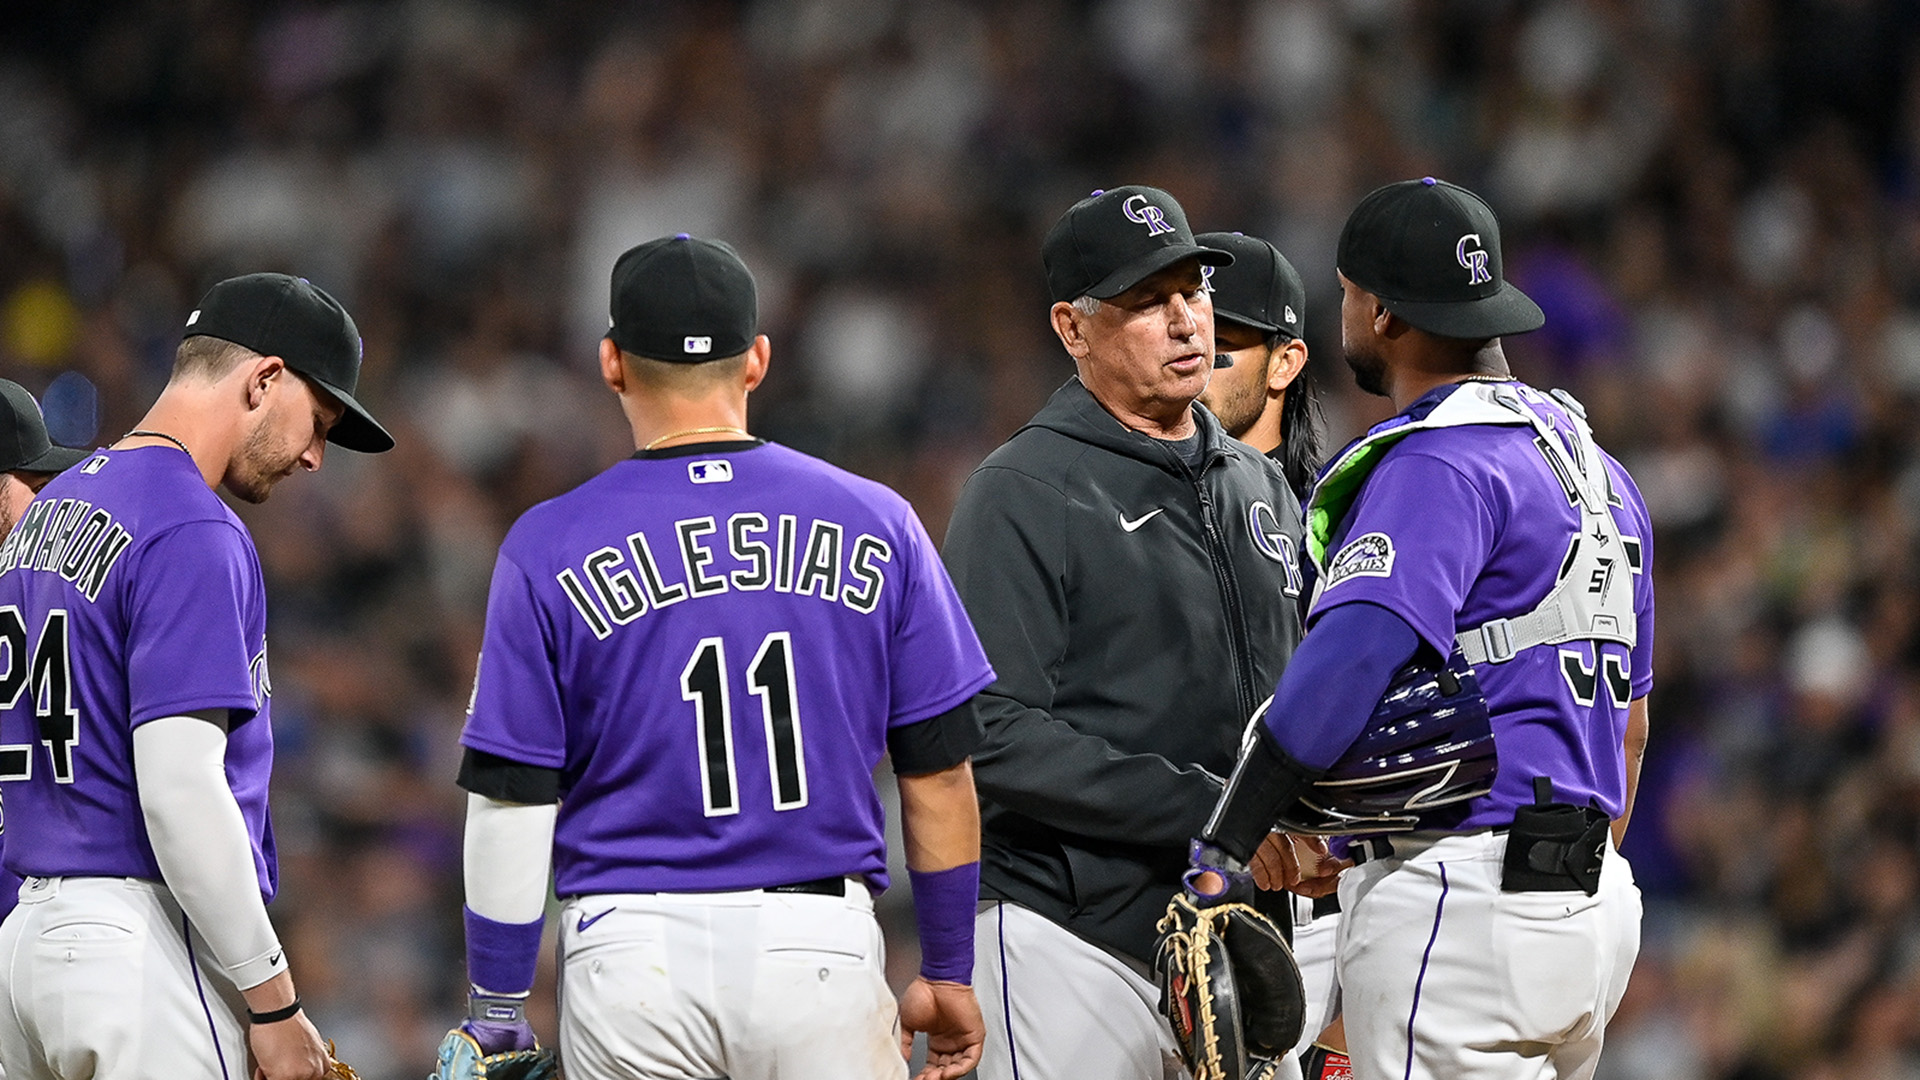 Colorado Rockies manager Bud Black has a word with catcher Elias Diaz during a pitching change in the eighth inning during a game between the Los Angeles Dodgers and the Colorado Rockies at Coors Field on April 9, 2022.